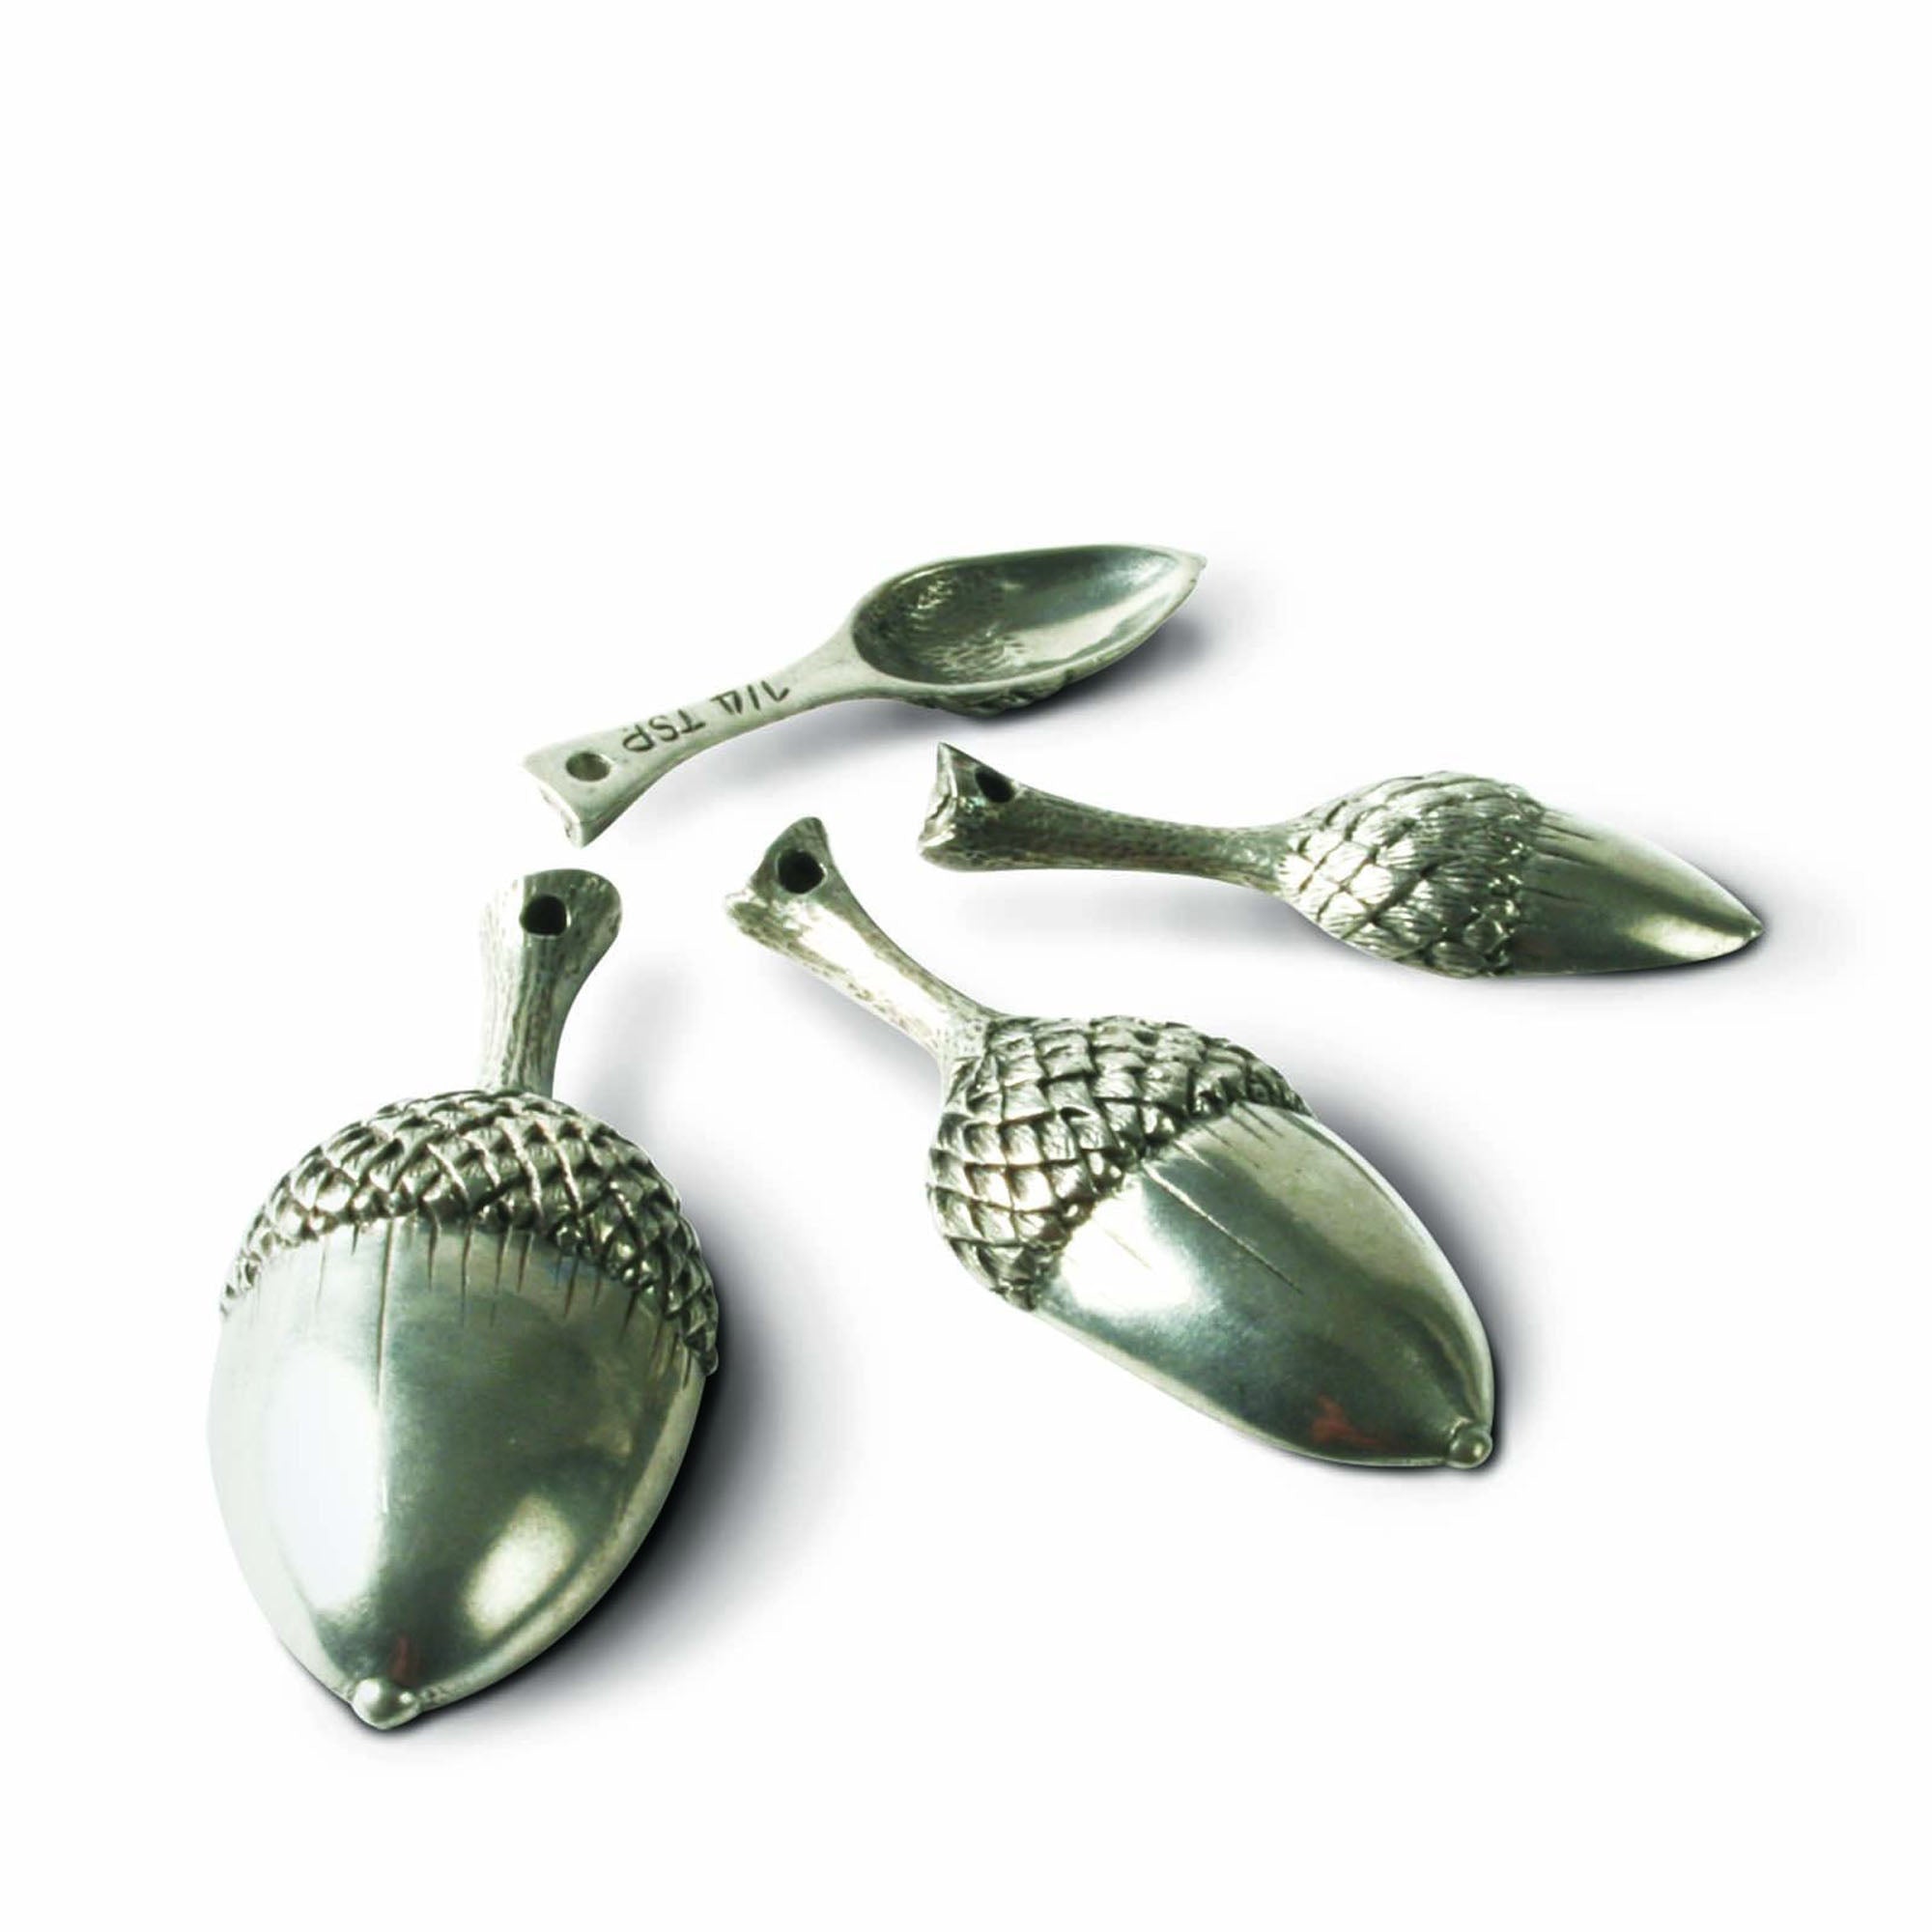 Vagabond House Pewter Acorn Measuring Spoons Product Image